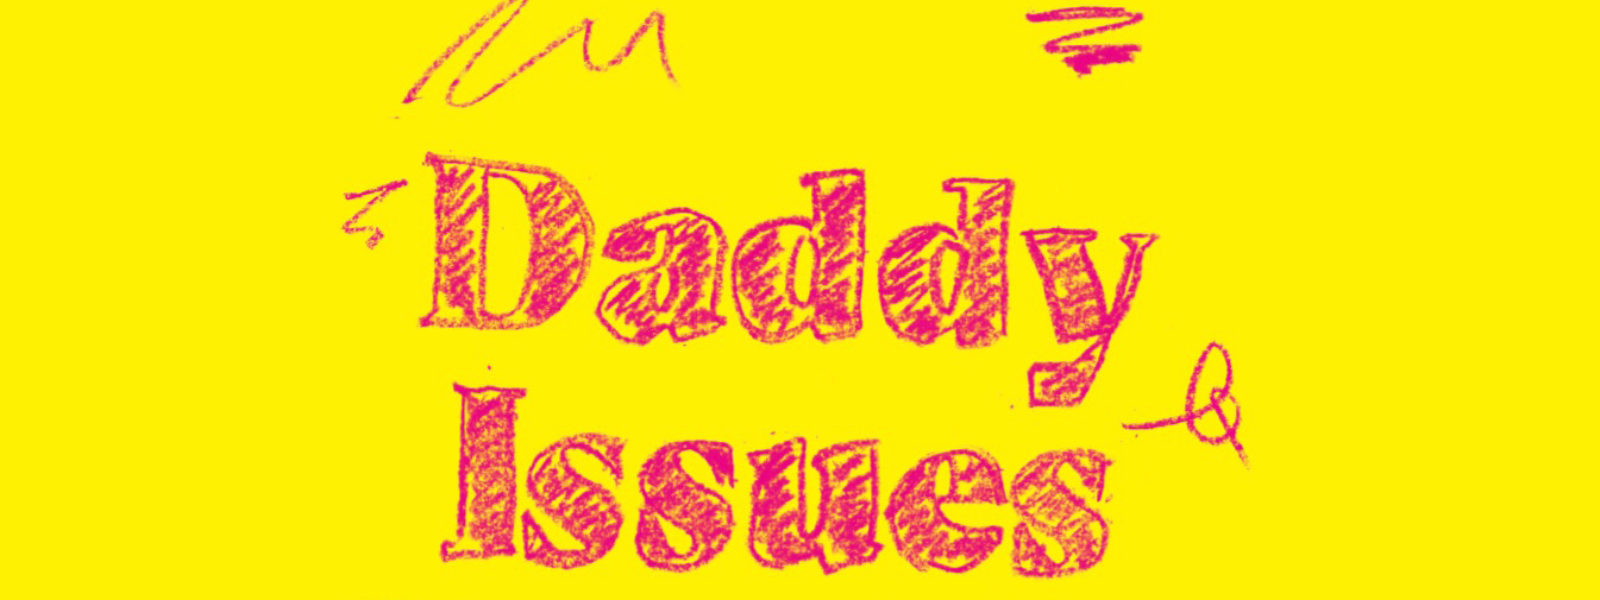 Katherine Angel, Daddy Issues, 2019